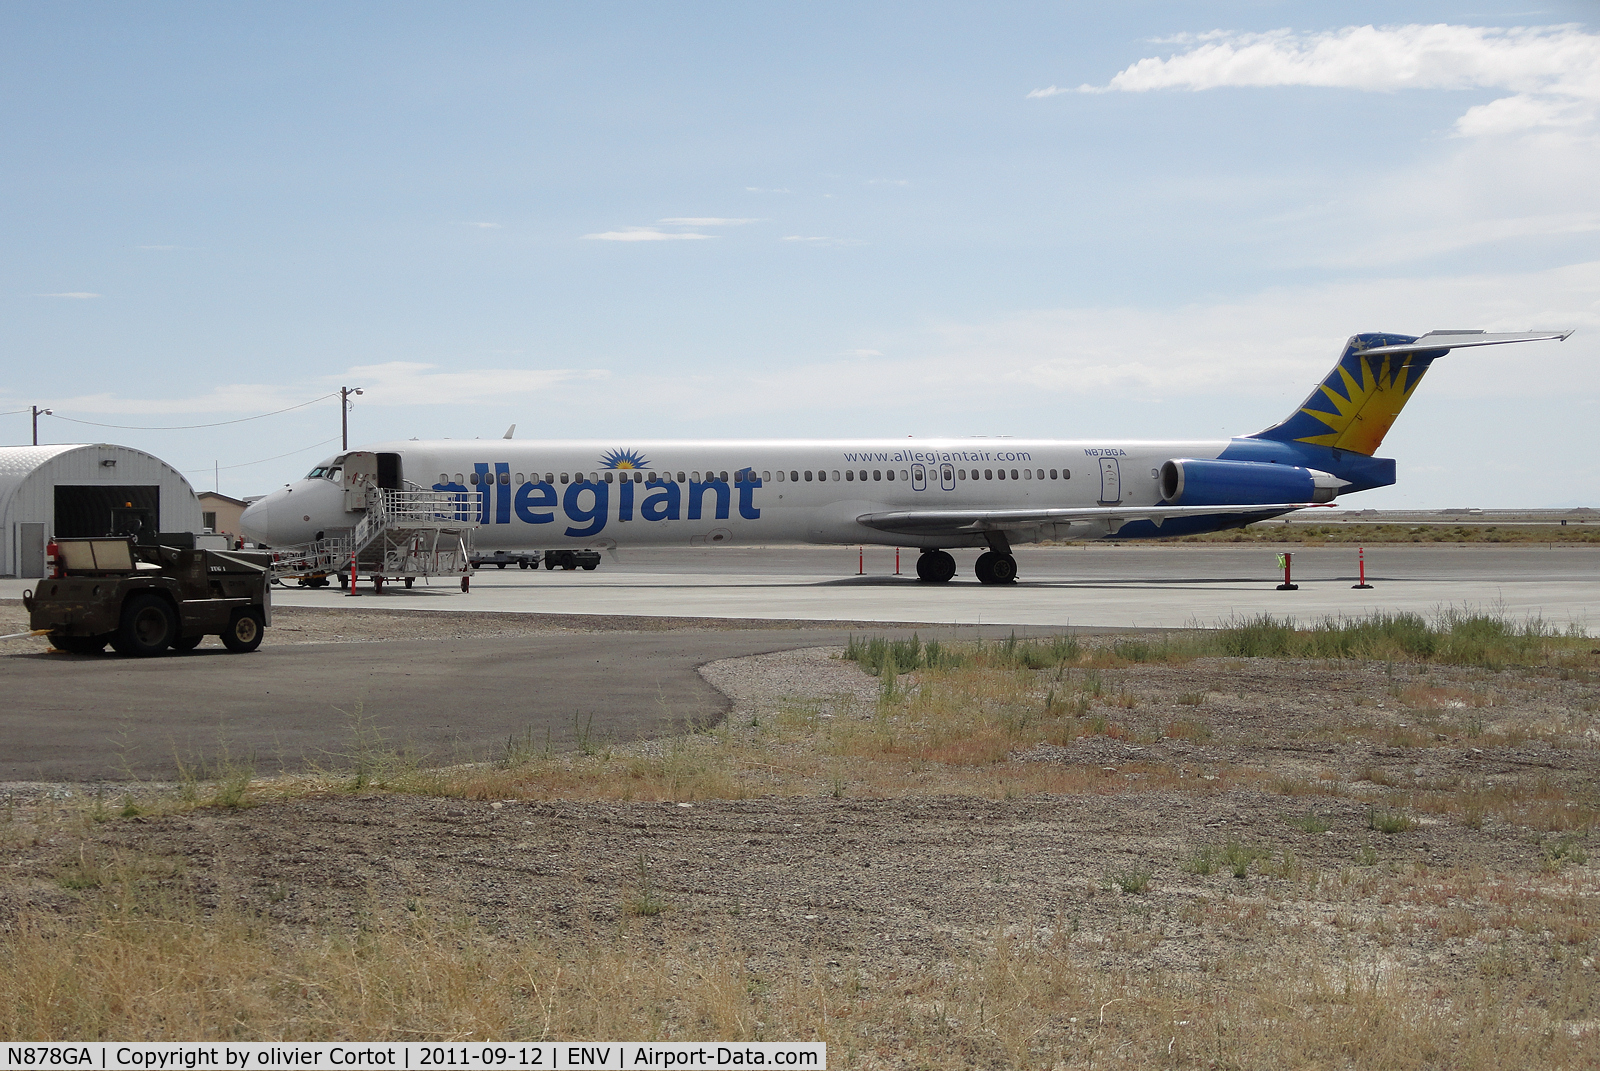 N878GA, 1996 McDonnell Douglas MD-83 (DC-9-83) C/N 53487, Small airport for a big aircraft